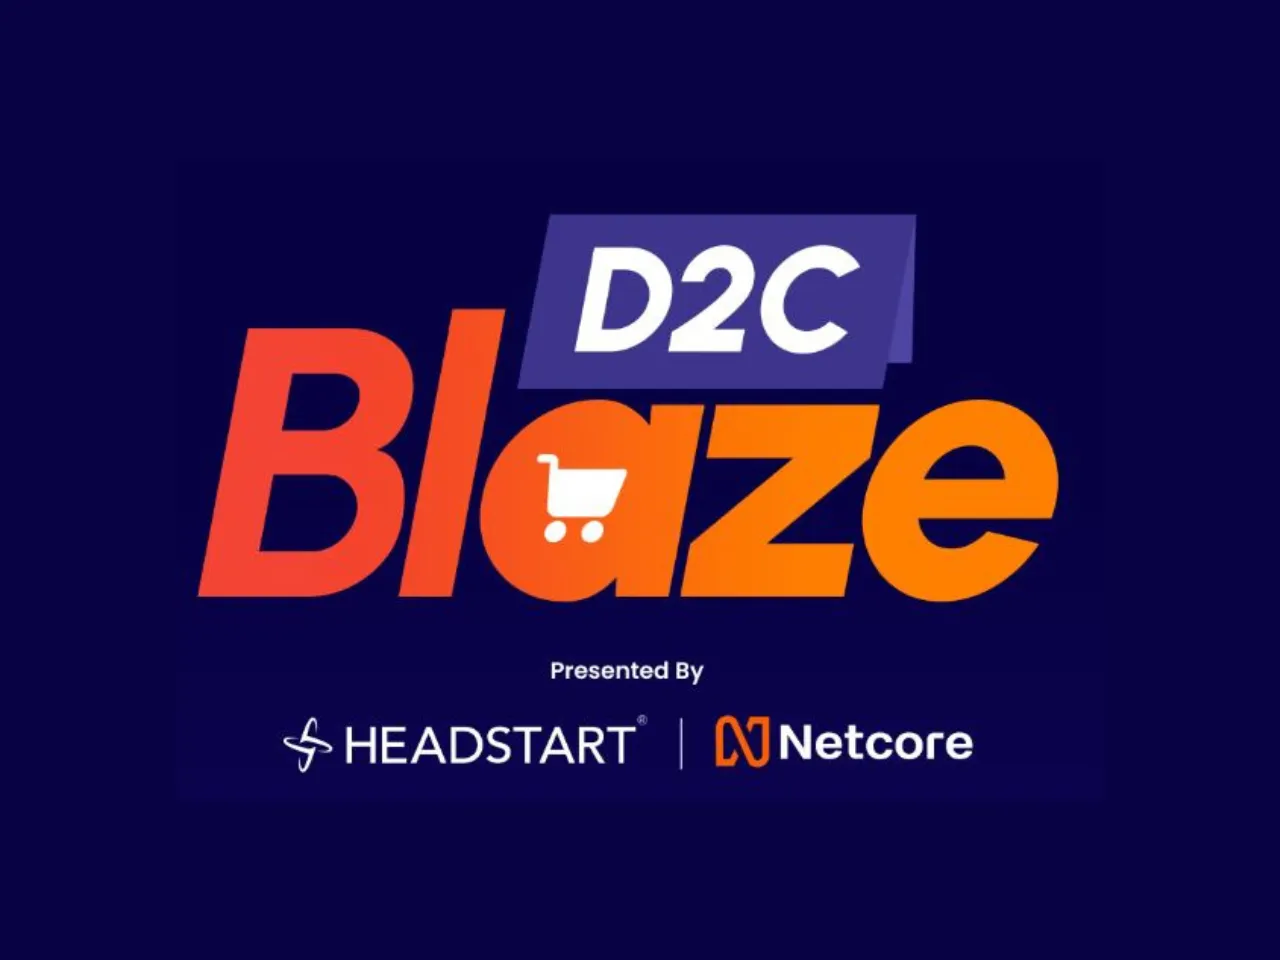 Netcore Cloud launches startup accelerator program ‘D2C Blaze' to support early stage D2C startups